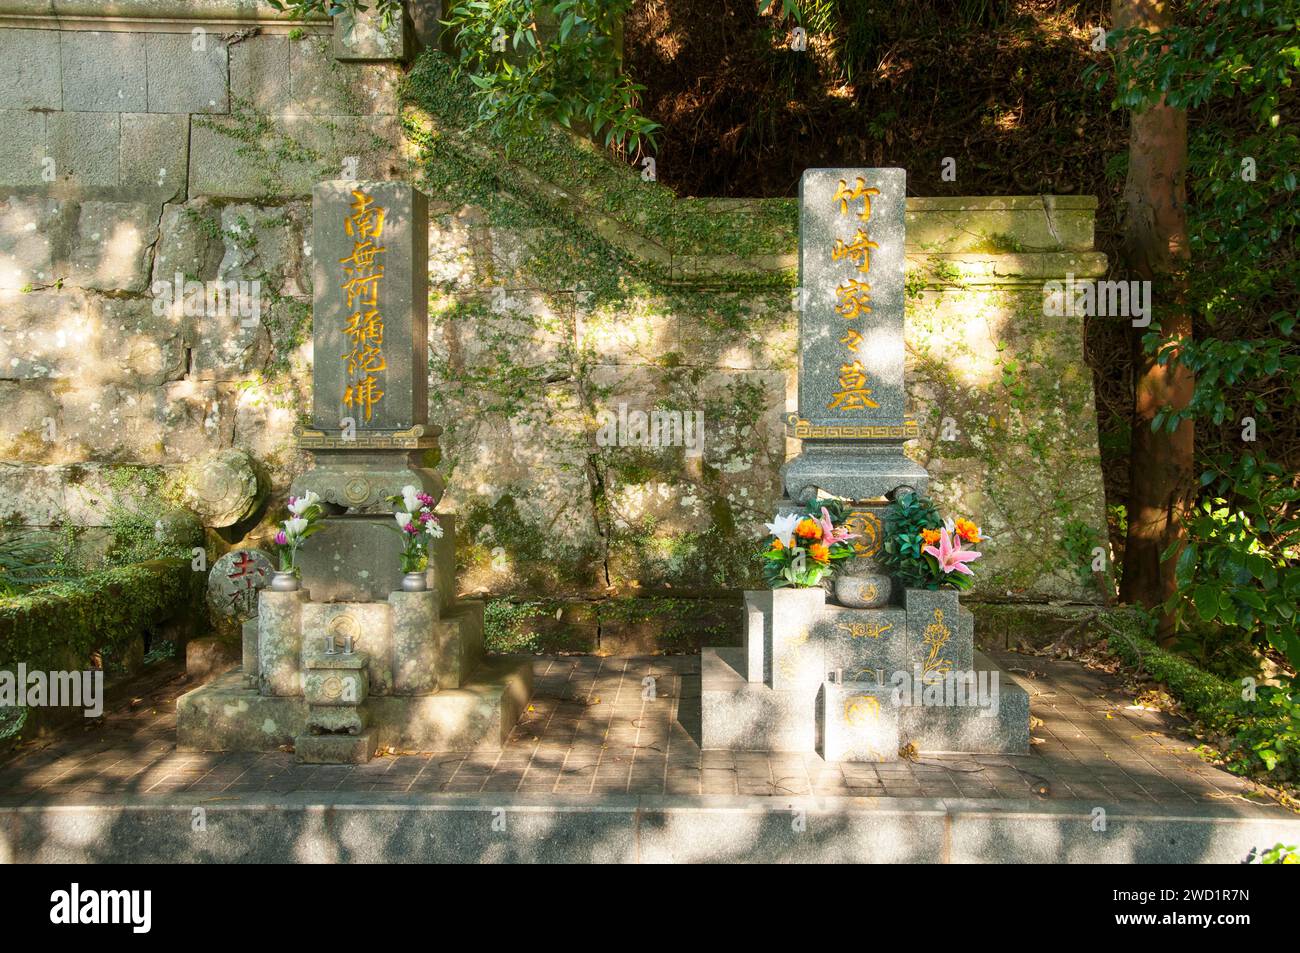 Japan: Cemetery, Sofuku-ji, Obaku Zen temple, Nagasaki, Kyushu. The temple, an example of Ming dynasty (1368 - 1644), southern Chinese architecture, dates from 1629 and was built by a Chinese monk named Chaonian. Stock Photo